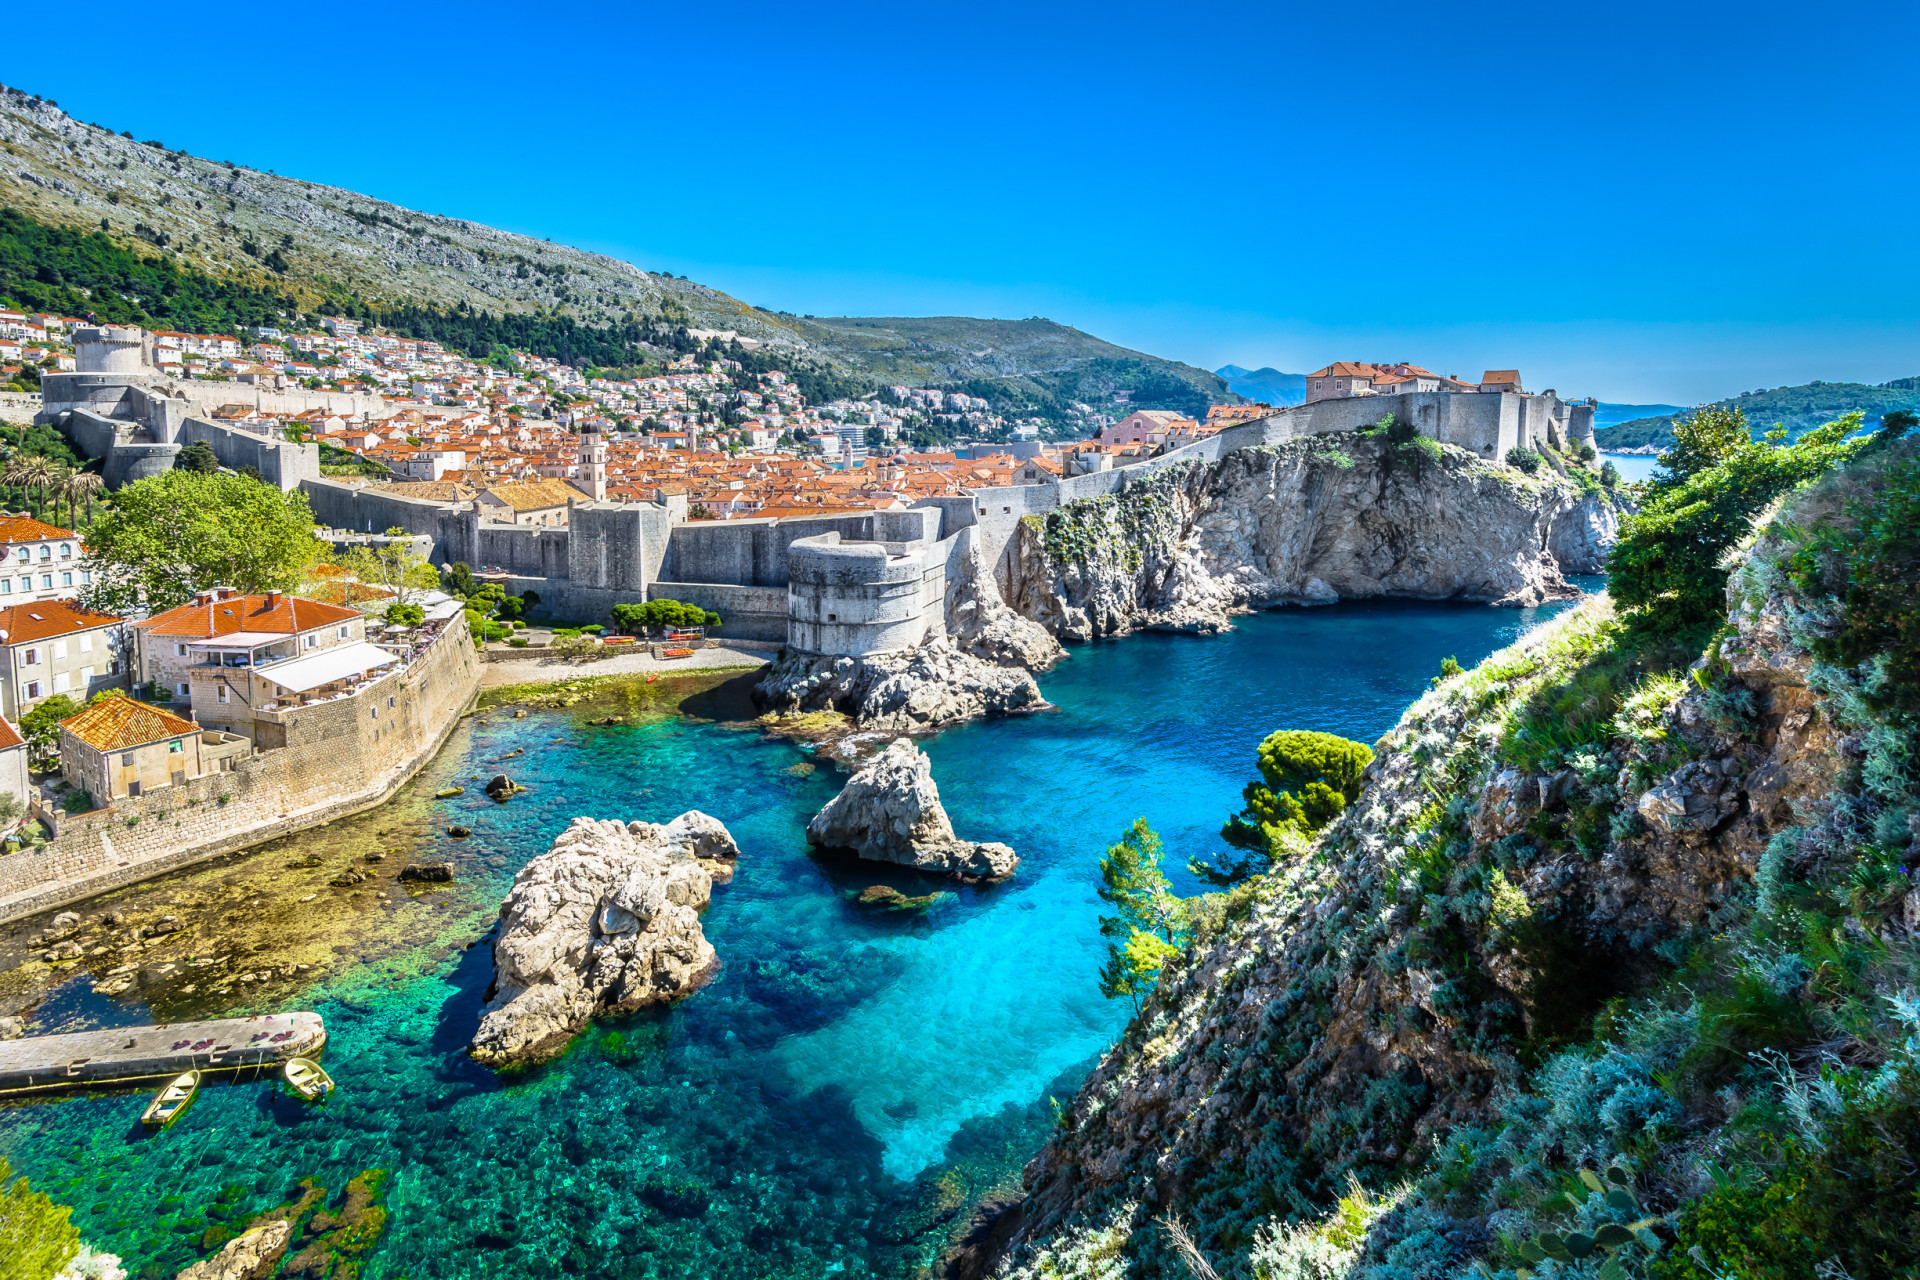 <p>The Croatian tourist tax depends on the season and location, but it's only around €1.33 (US$1.45) per night.</p><p><a href="https://www.msn.com/en-ph/community/channel/vid-7xx8mnucu55yw63we9va2gwr7uihbxwc68fxqp25x6tg4ftibpra?cvid=94631541bc0f4f89bfd59158d696ad7e">Follow us and access great exclusive content every day</a></p>